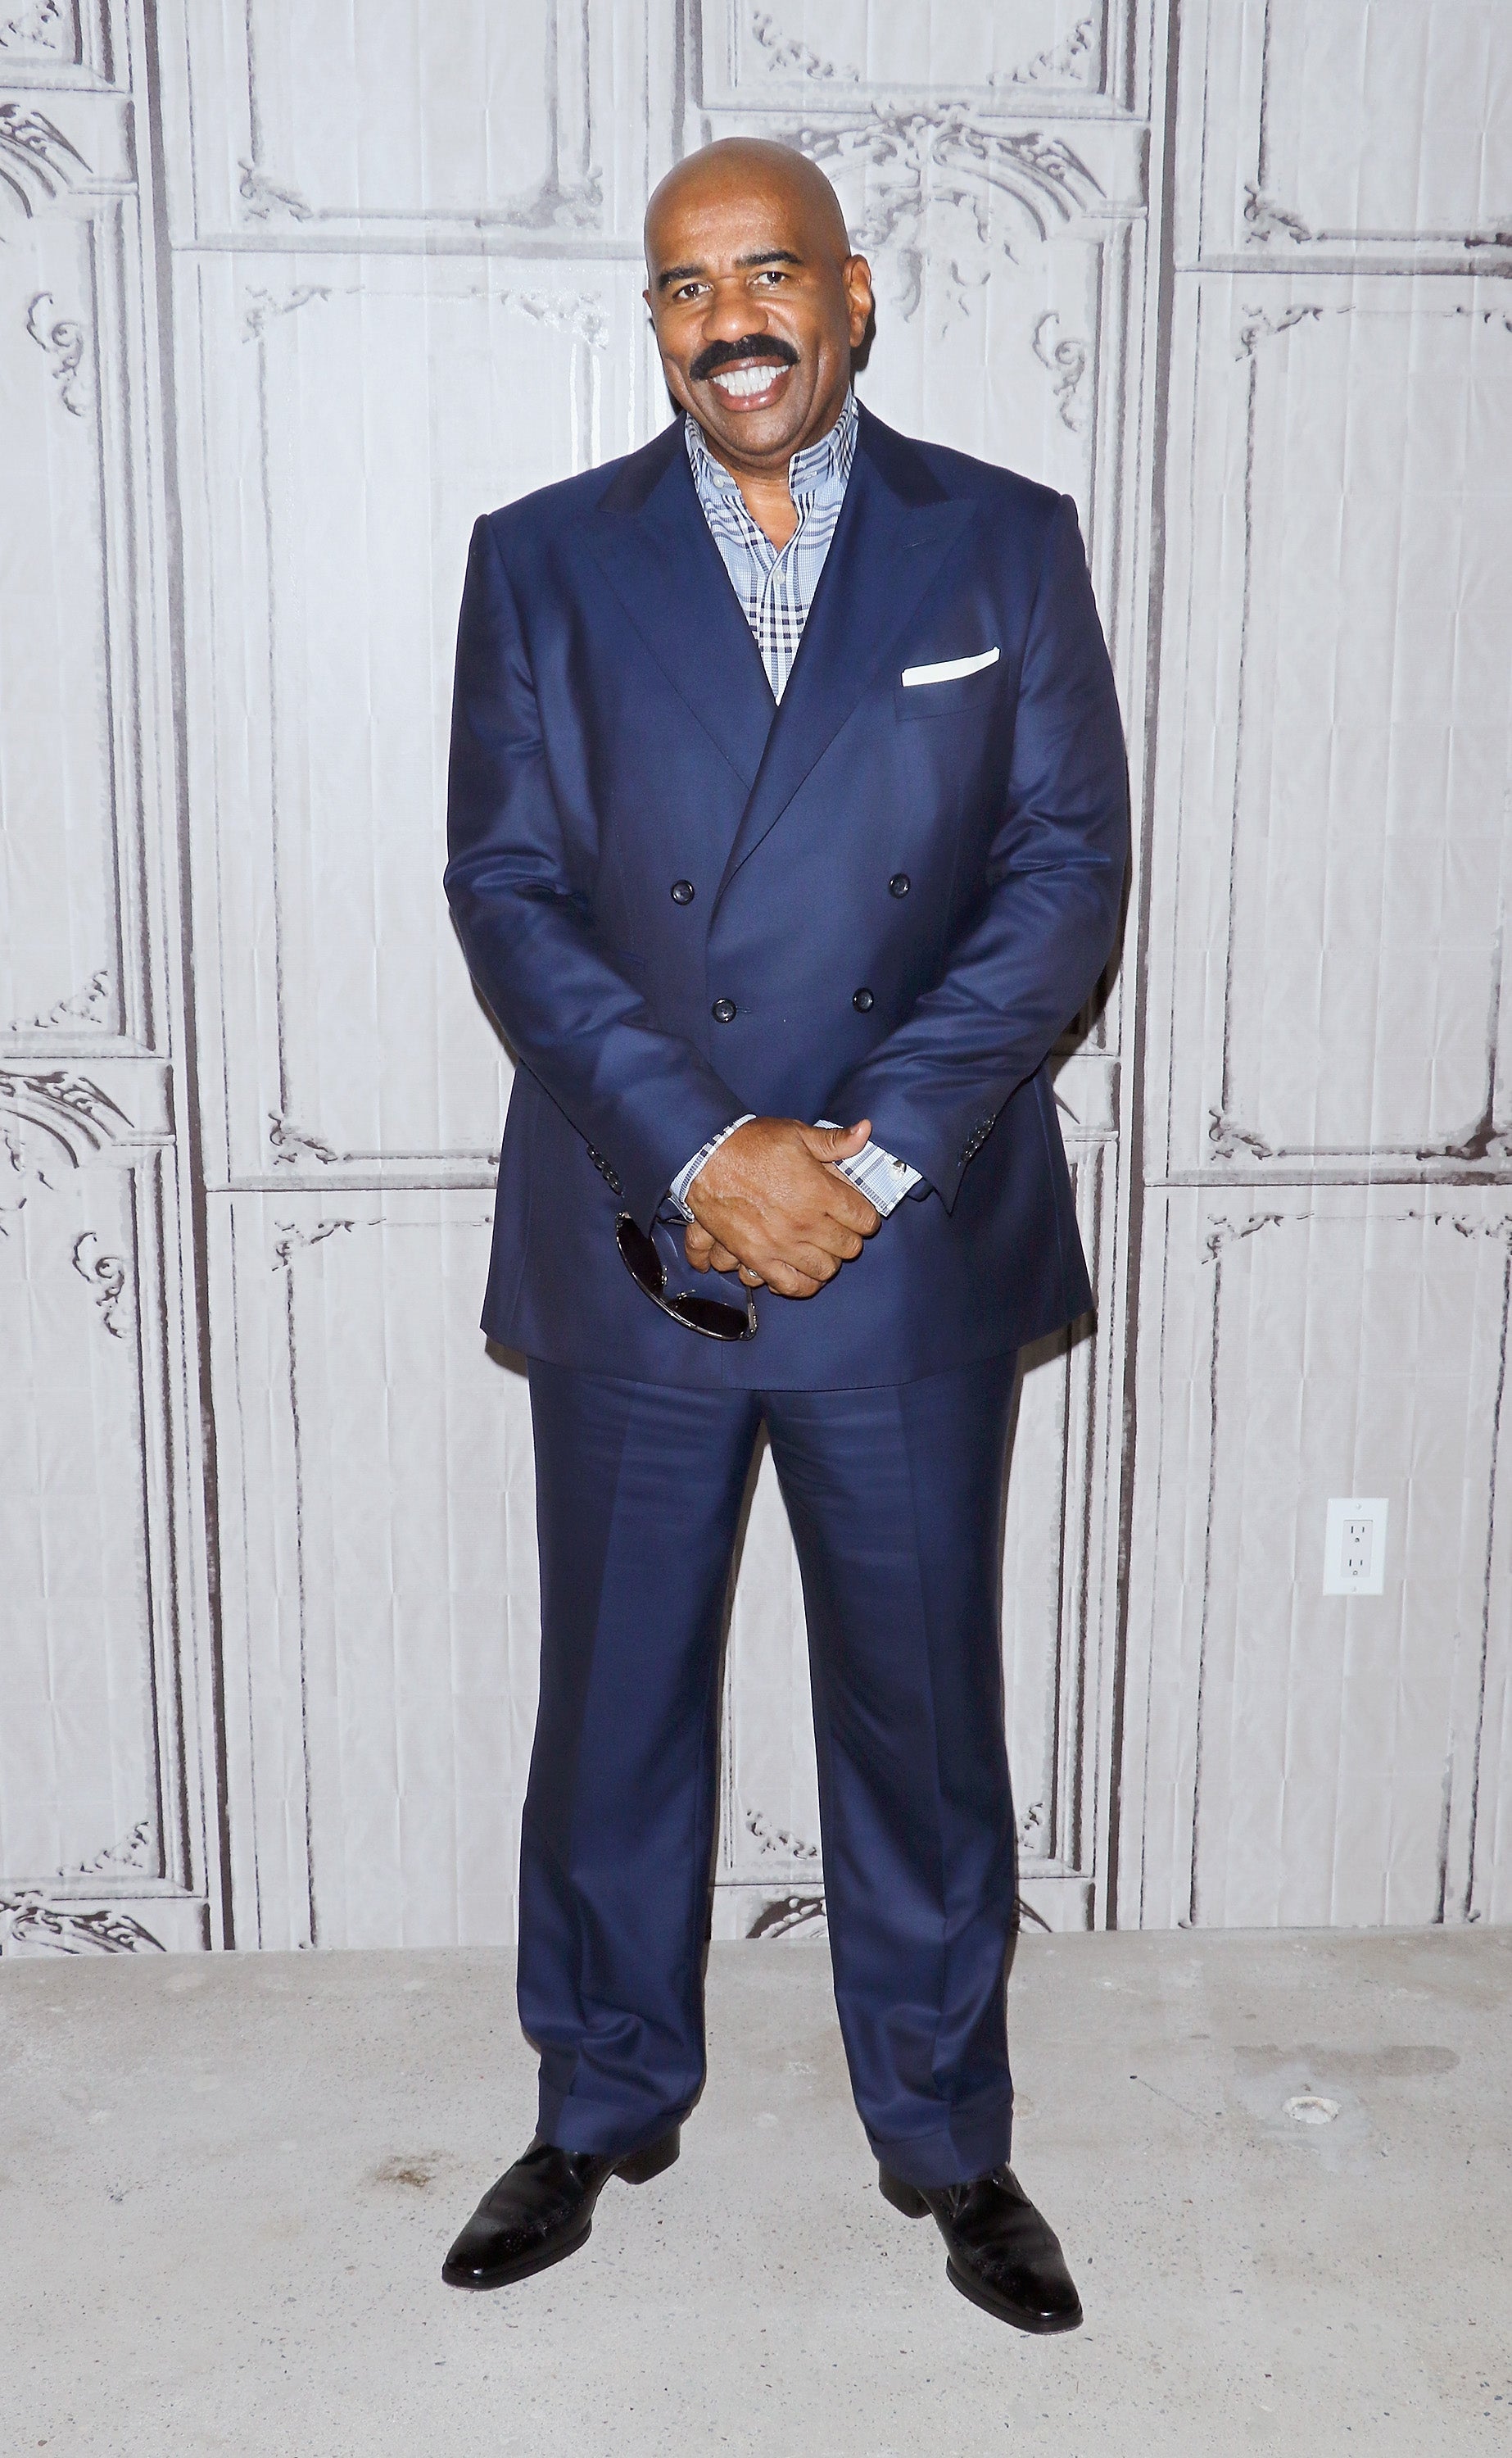 11 Celeb Men in Their Fifties Whose Style is Always on Point
